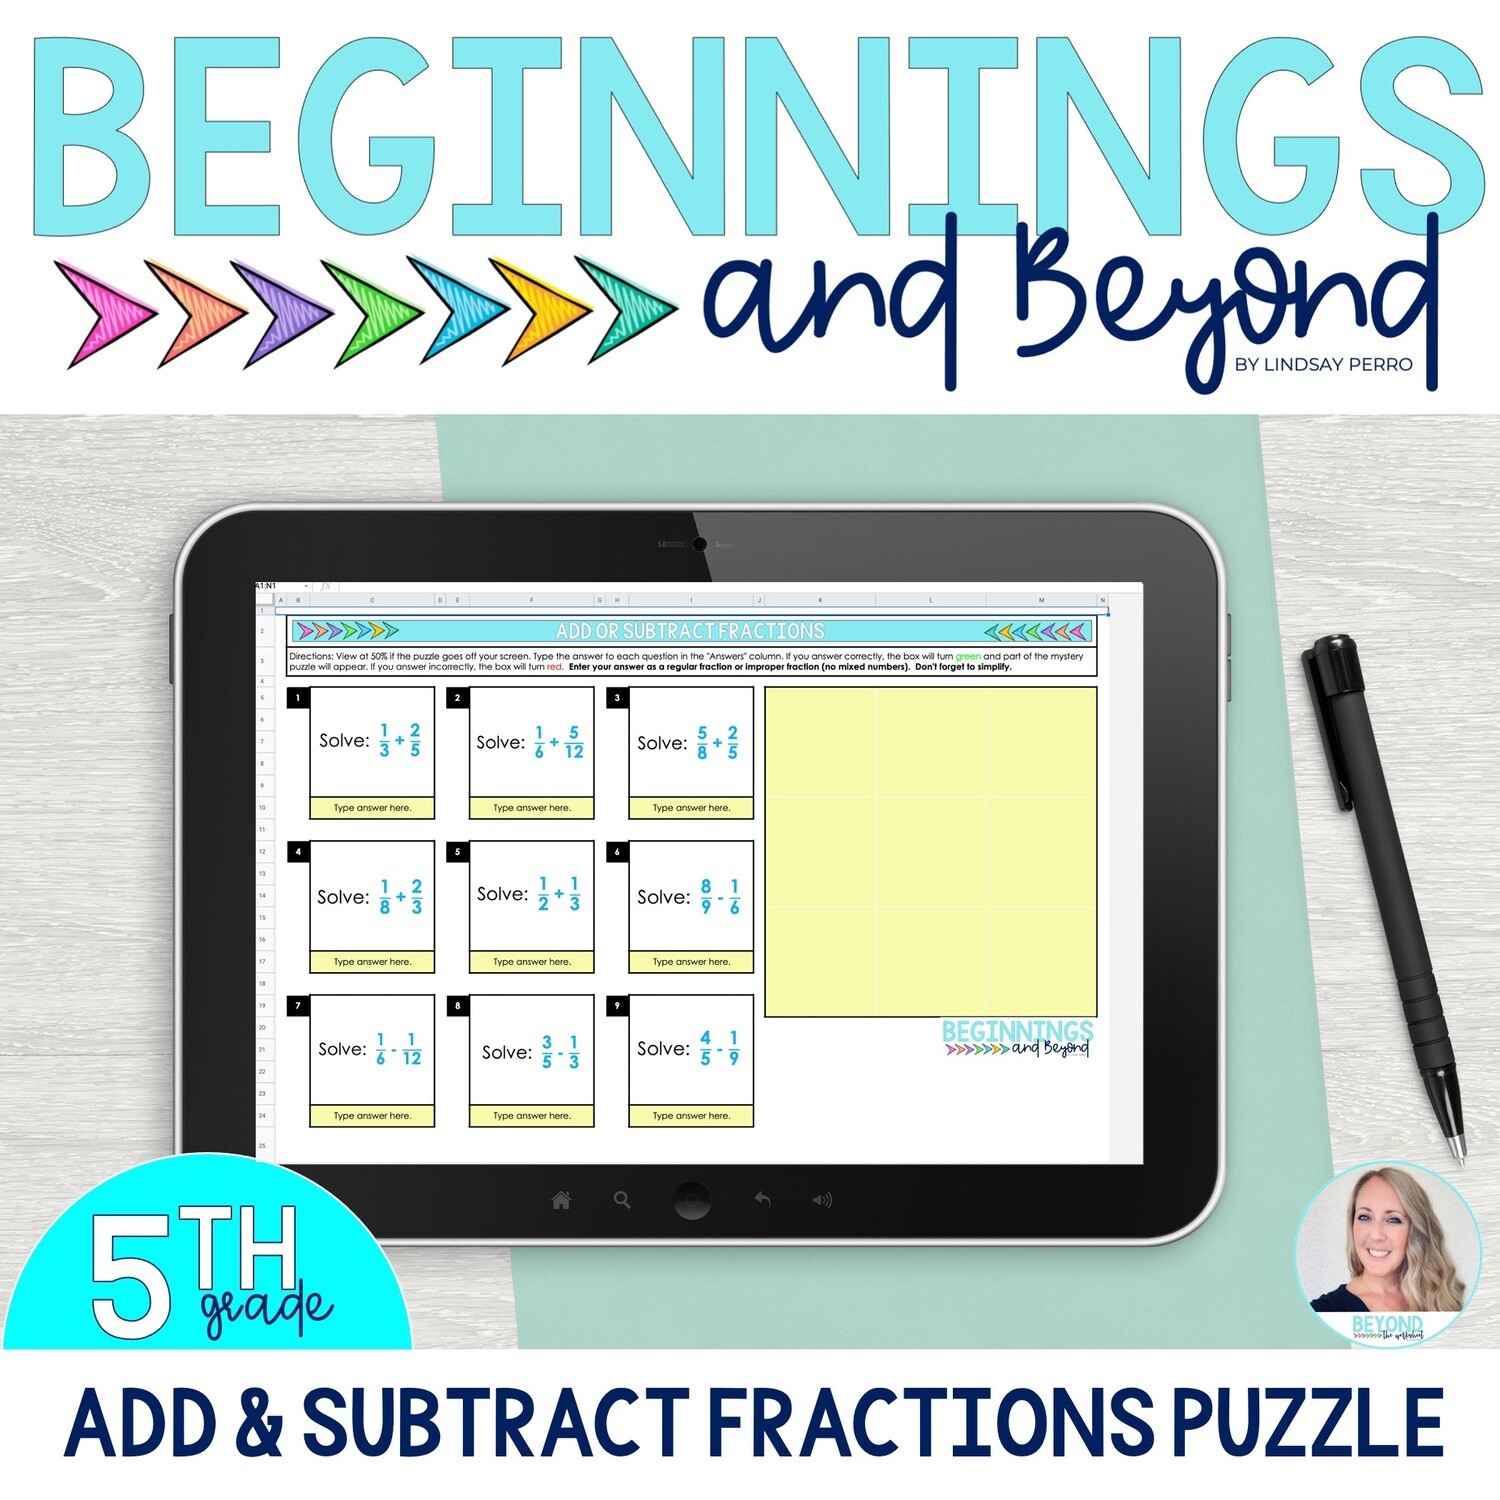 Add and Subtract Fractions Digital Puzzle